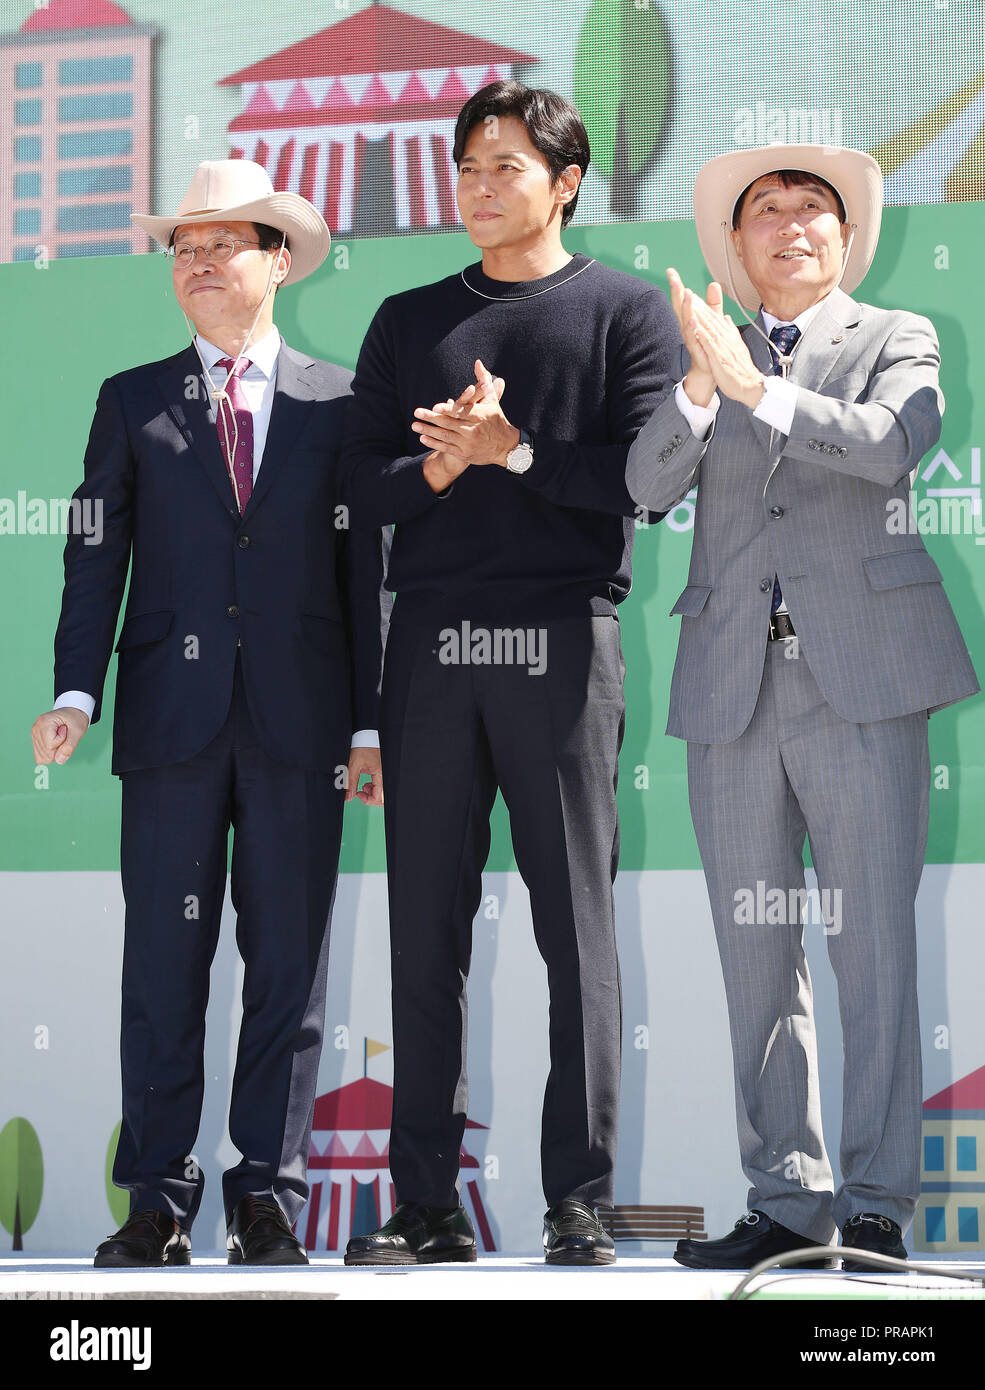 01st Oct, 2018. S. Korean actor Jang Dong-gun South Korean actor Jang Dong-gun (C) attends the 5th Handon Day at Seoul Land in Gwacheon, Gyeonggi Province, just south of Seoul, on Sept. 29, 2018. Credit: Yonhap/Newcom/Alamy Live News Stock Photo